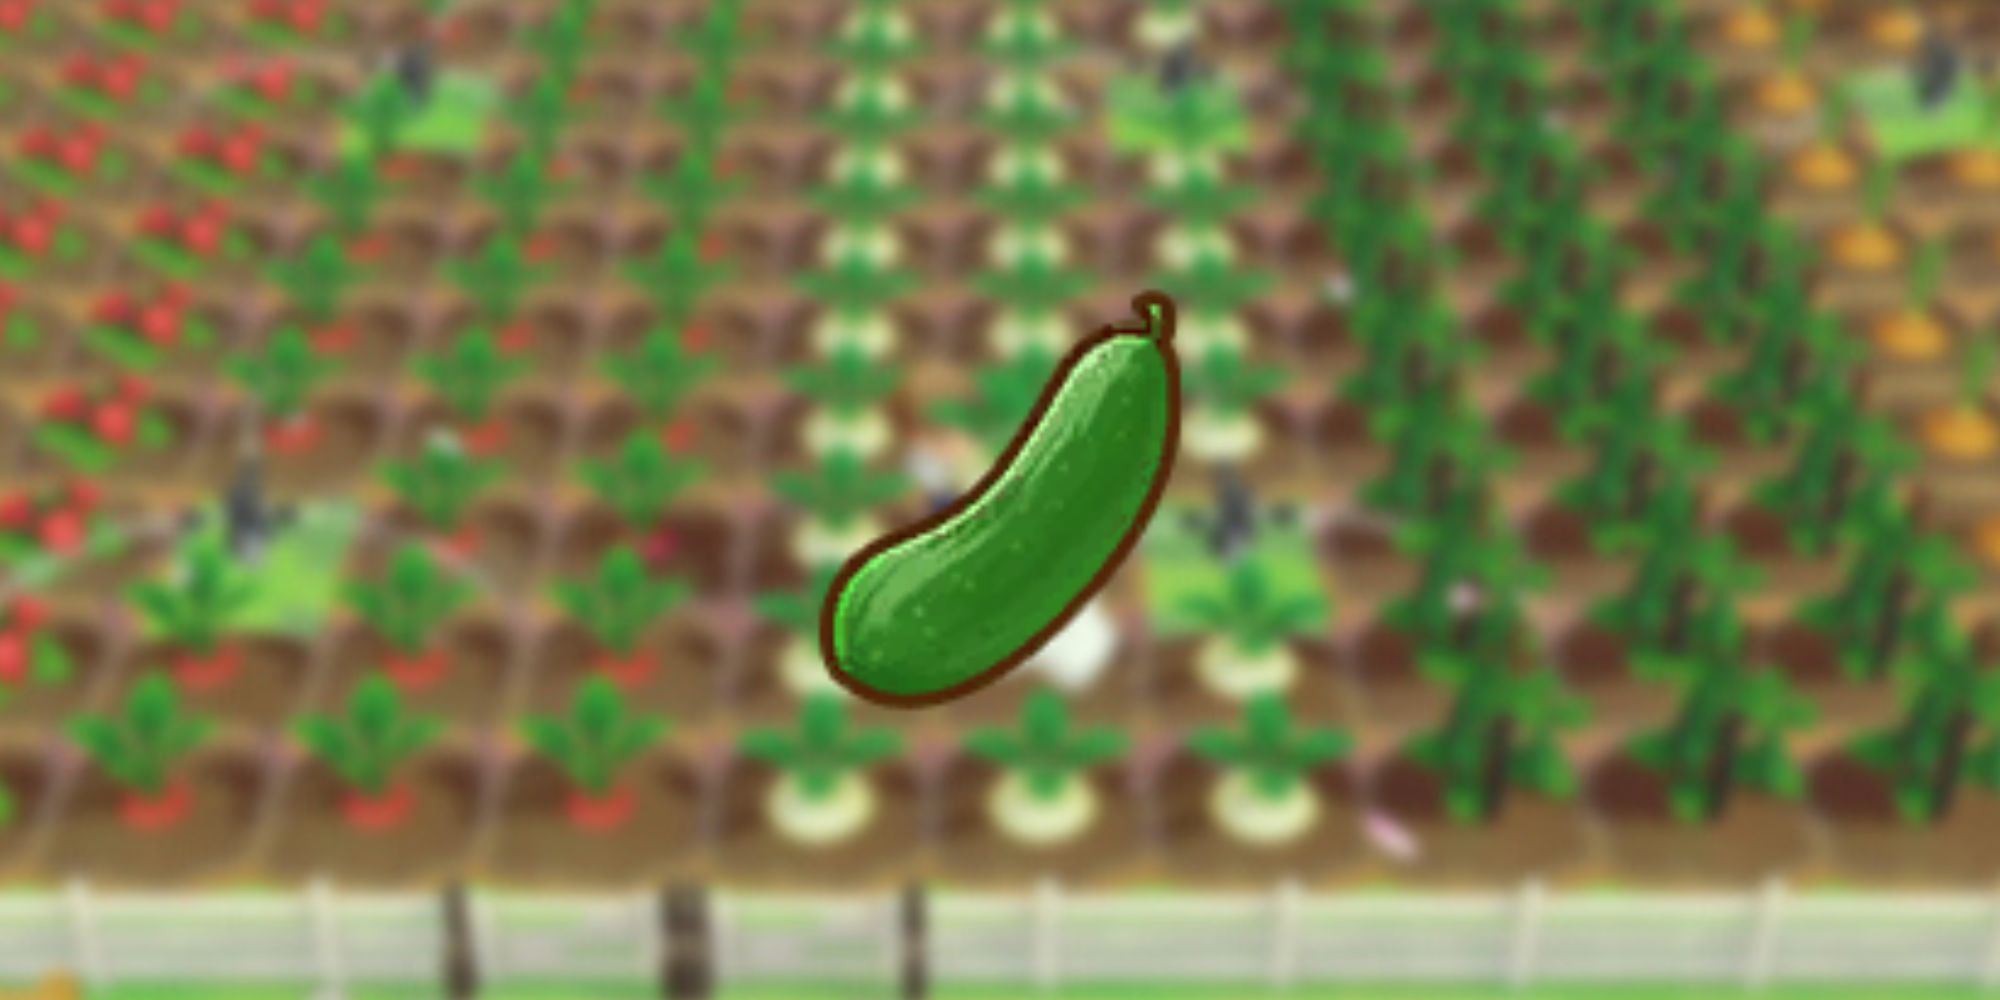 Cucumber icon as it would be seen in players inventory over blurred background of crops in game